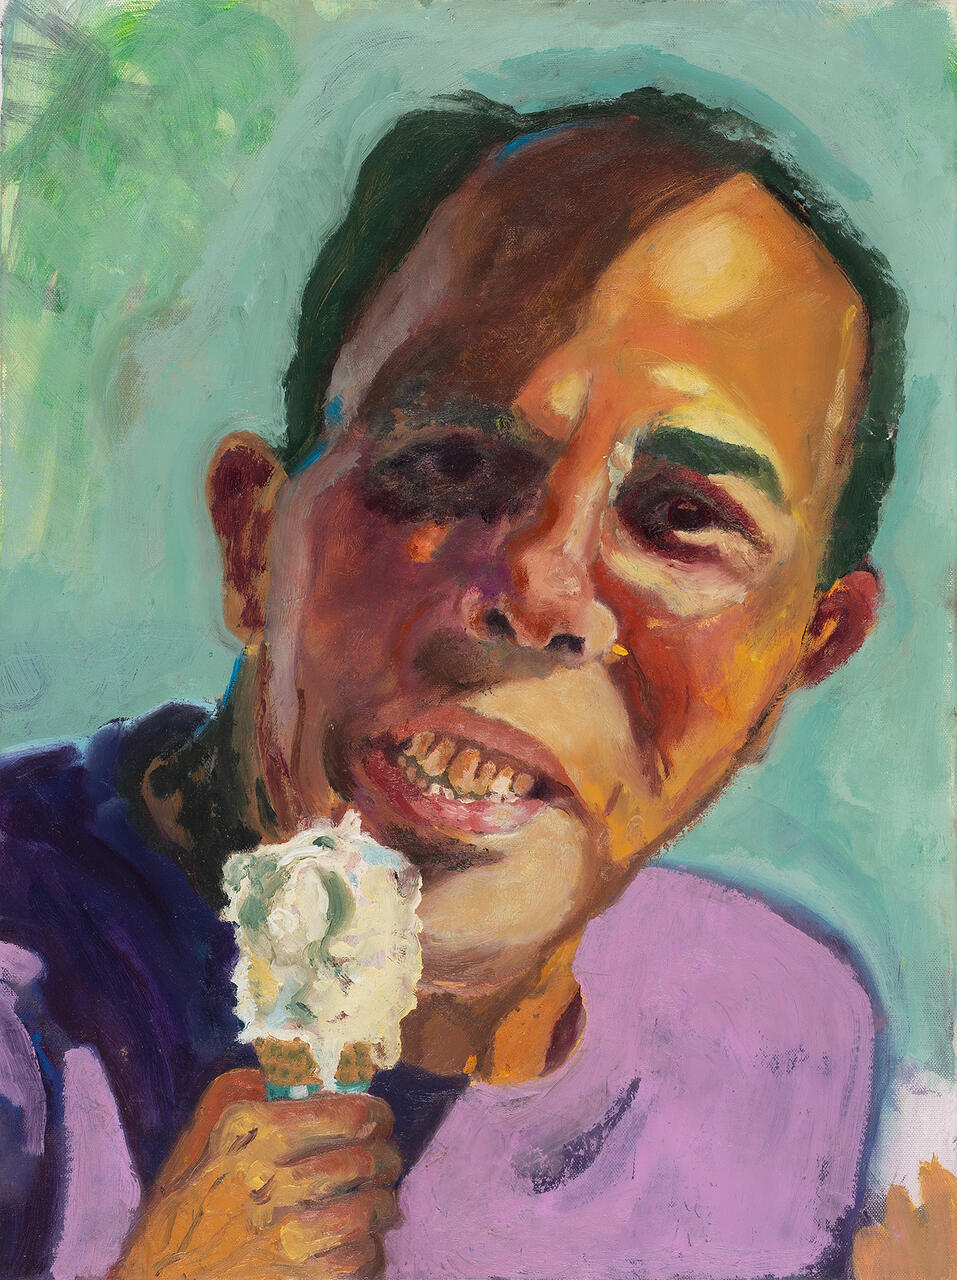 Portrait of Father with ice cream cone | Oil on canvas, 18x24 in, 2020 | Private collection of Kelli Scott Kelley